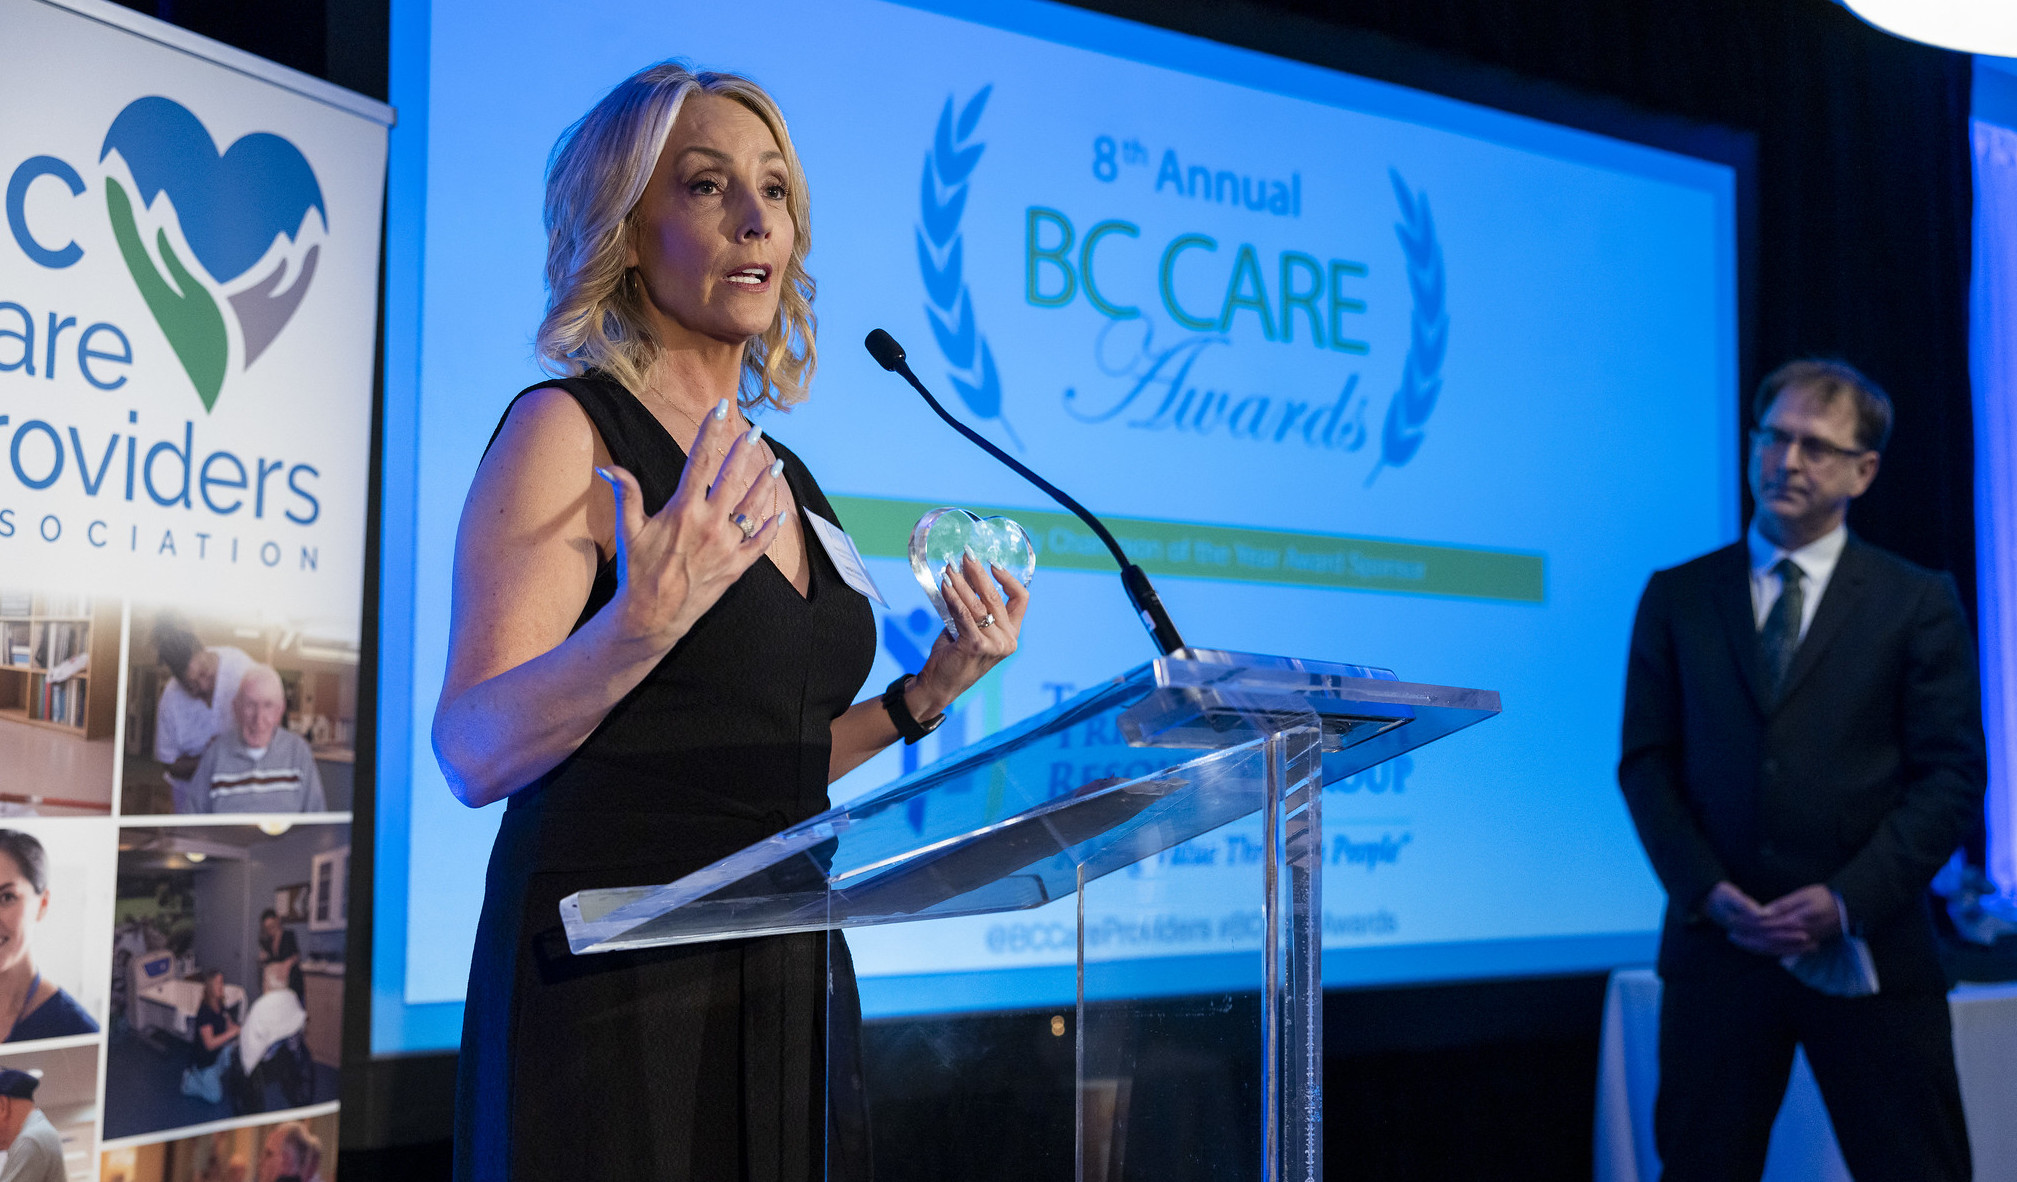 8th Annual BC Care Awards: Wrap Up